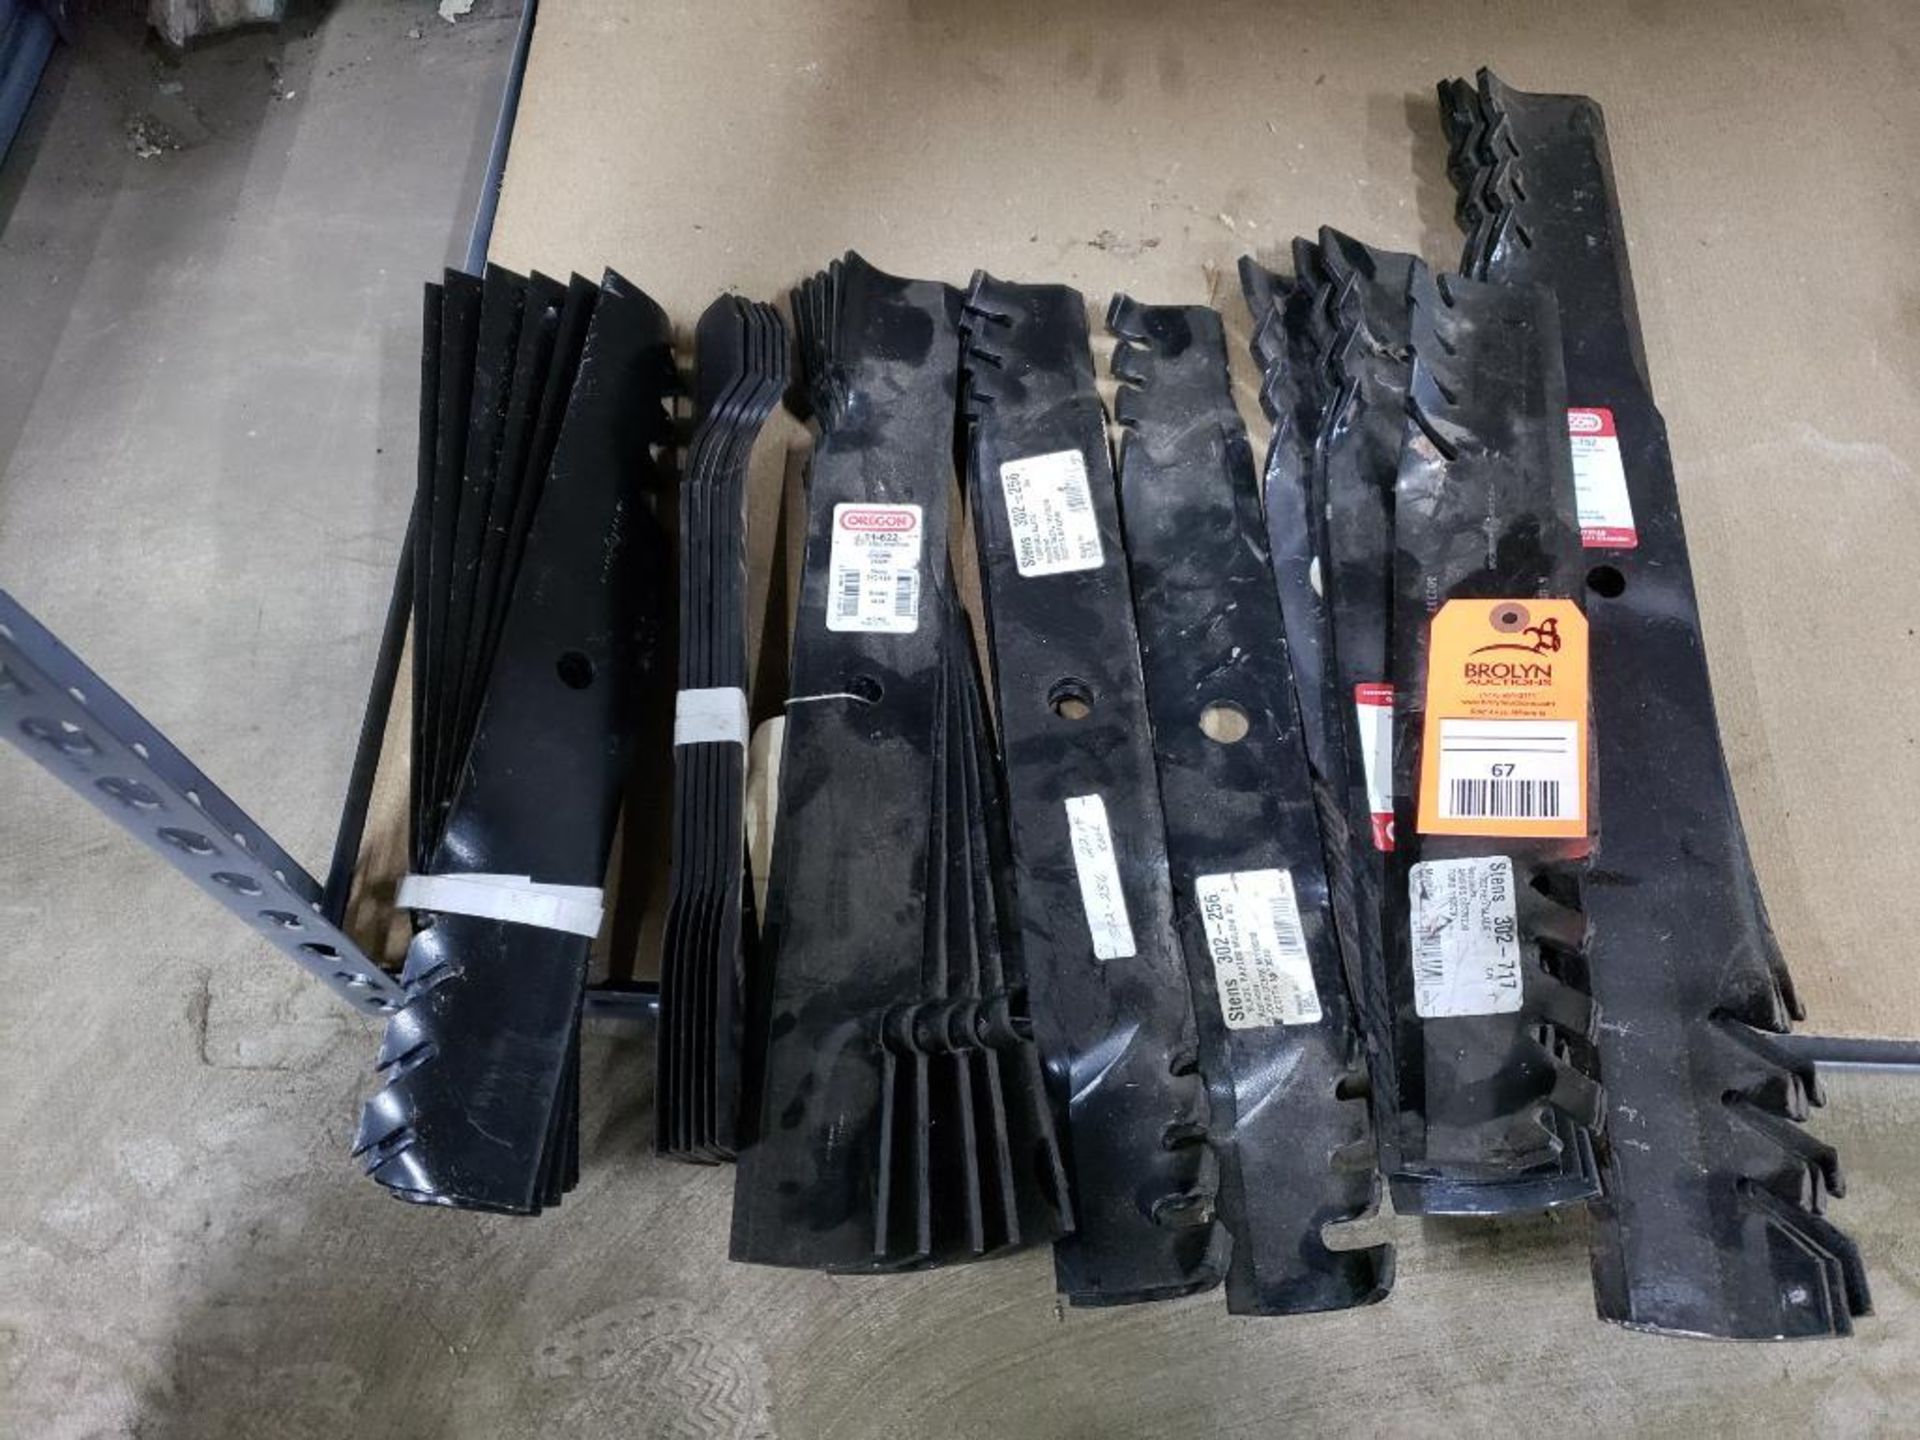 Qty 28 - Assorted mower blades. New old stock.